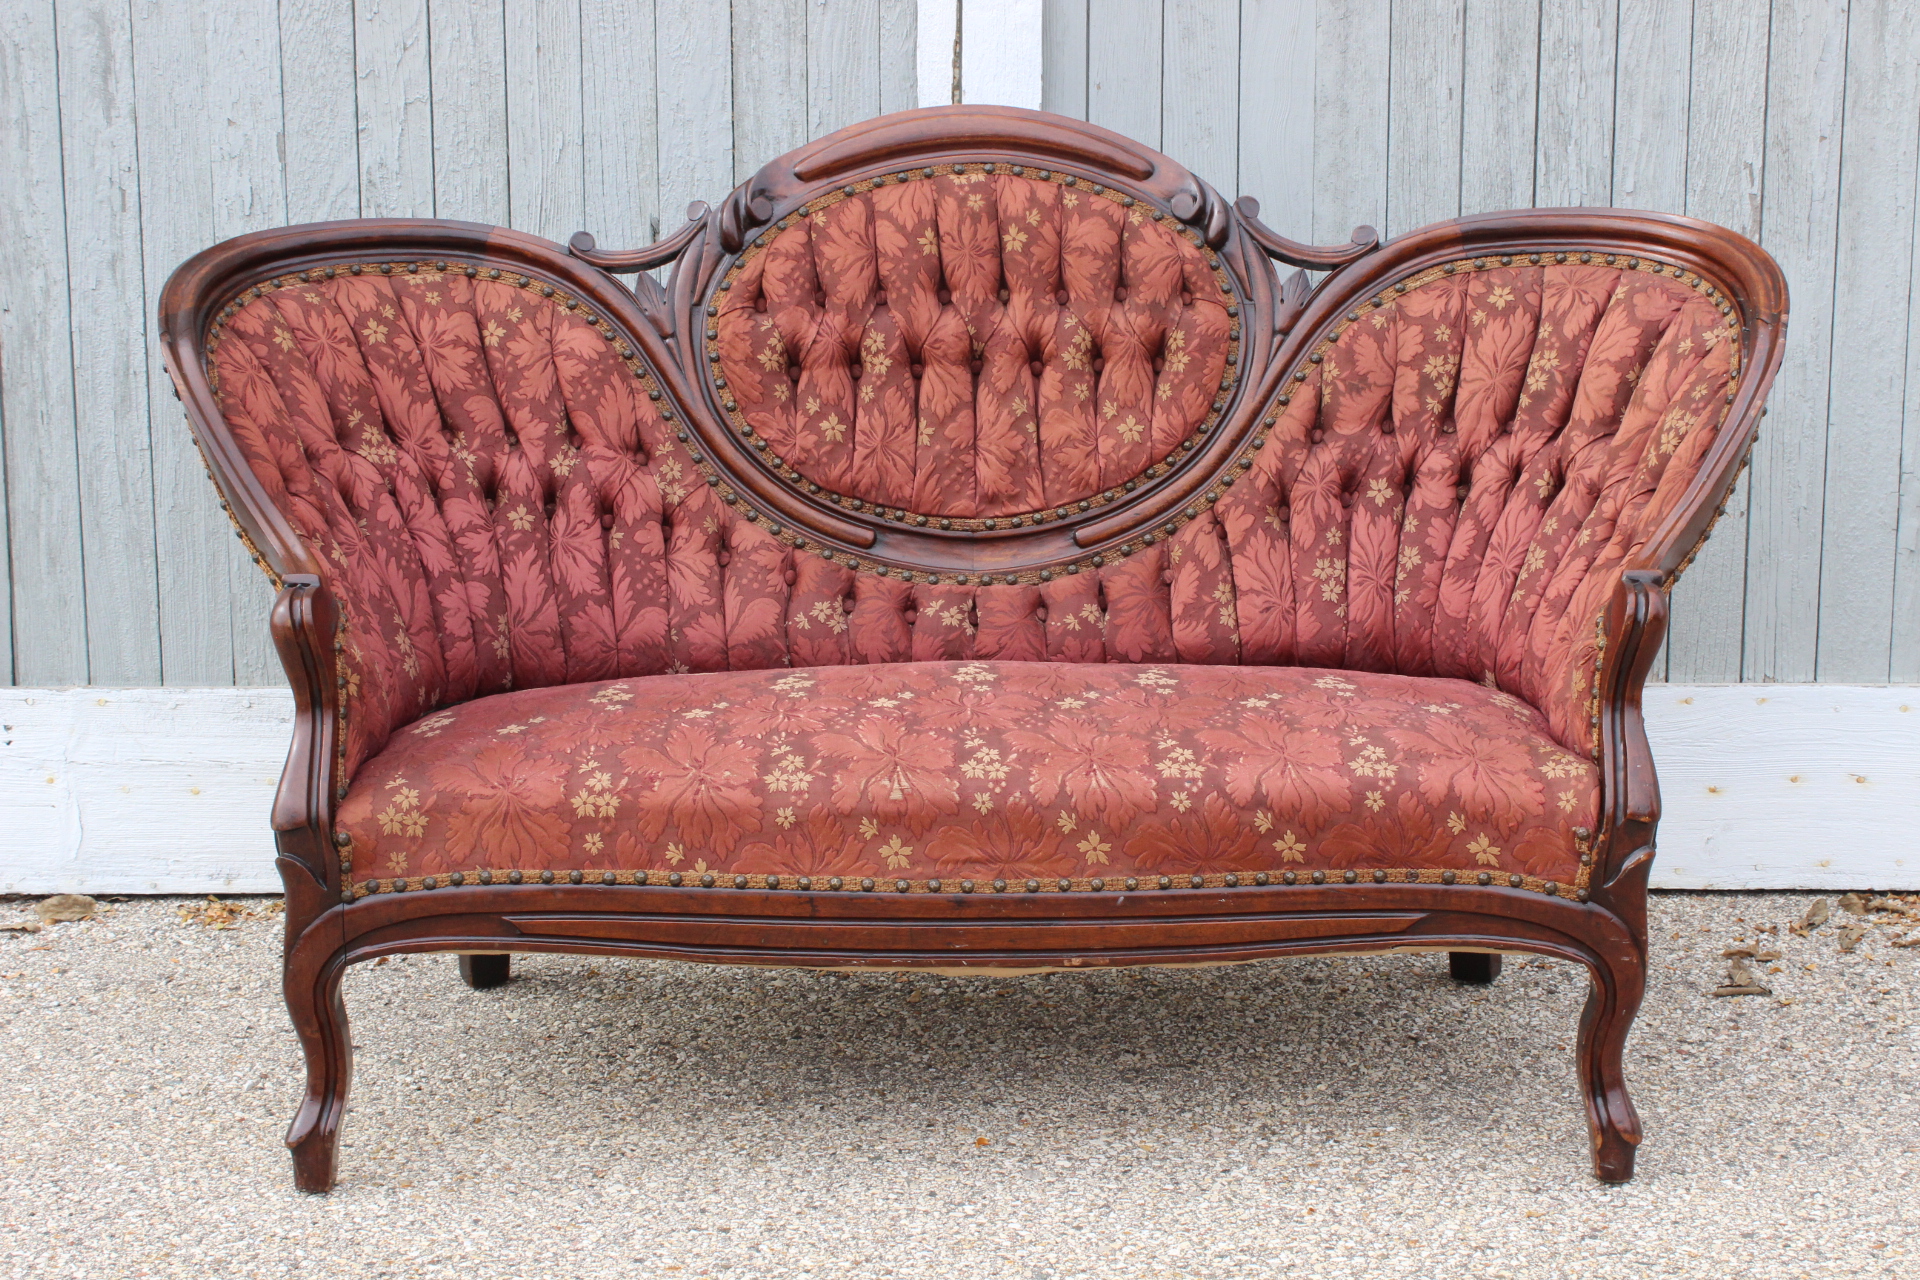 Antique Red Fabric Two Seater Victorian Sofa For Living Room With ...